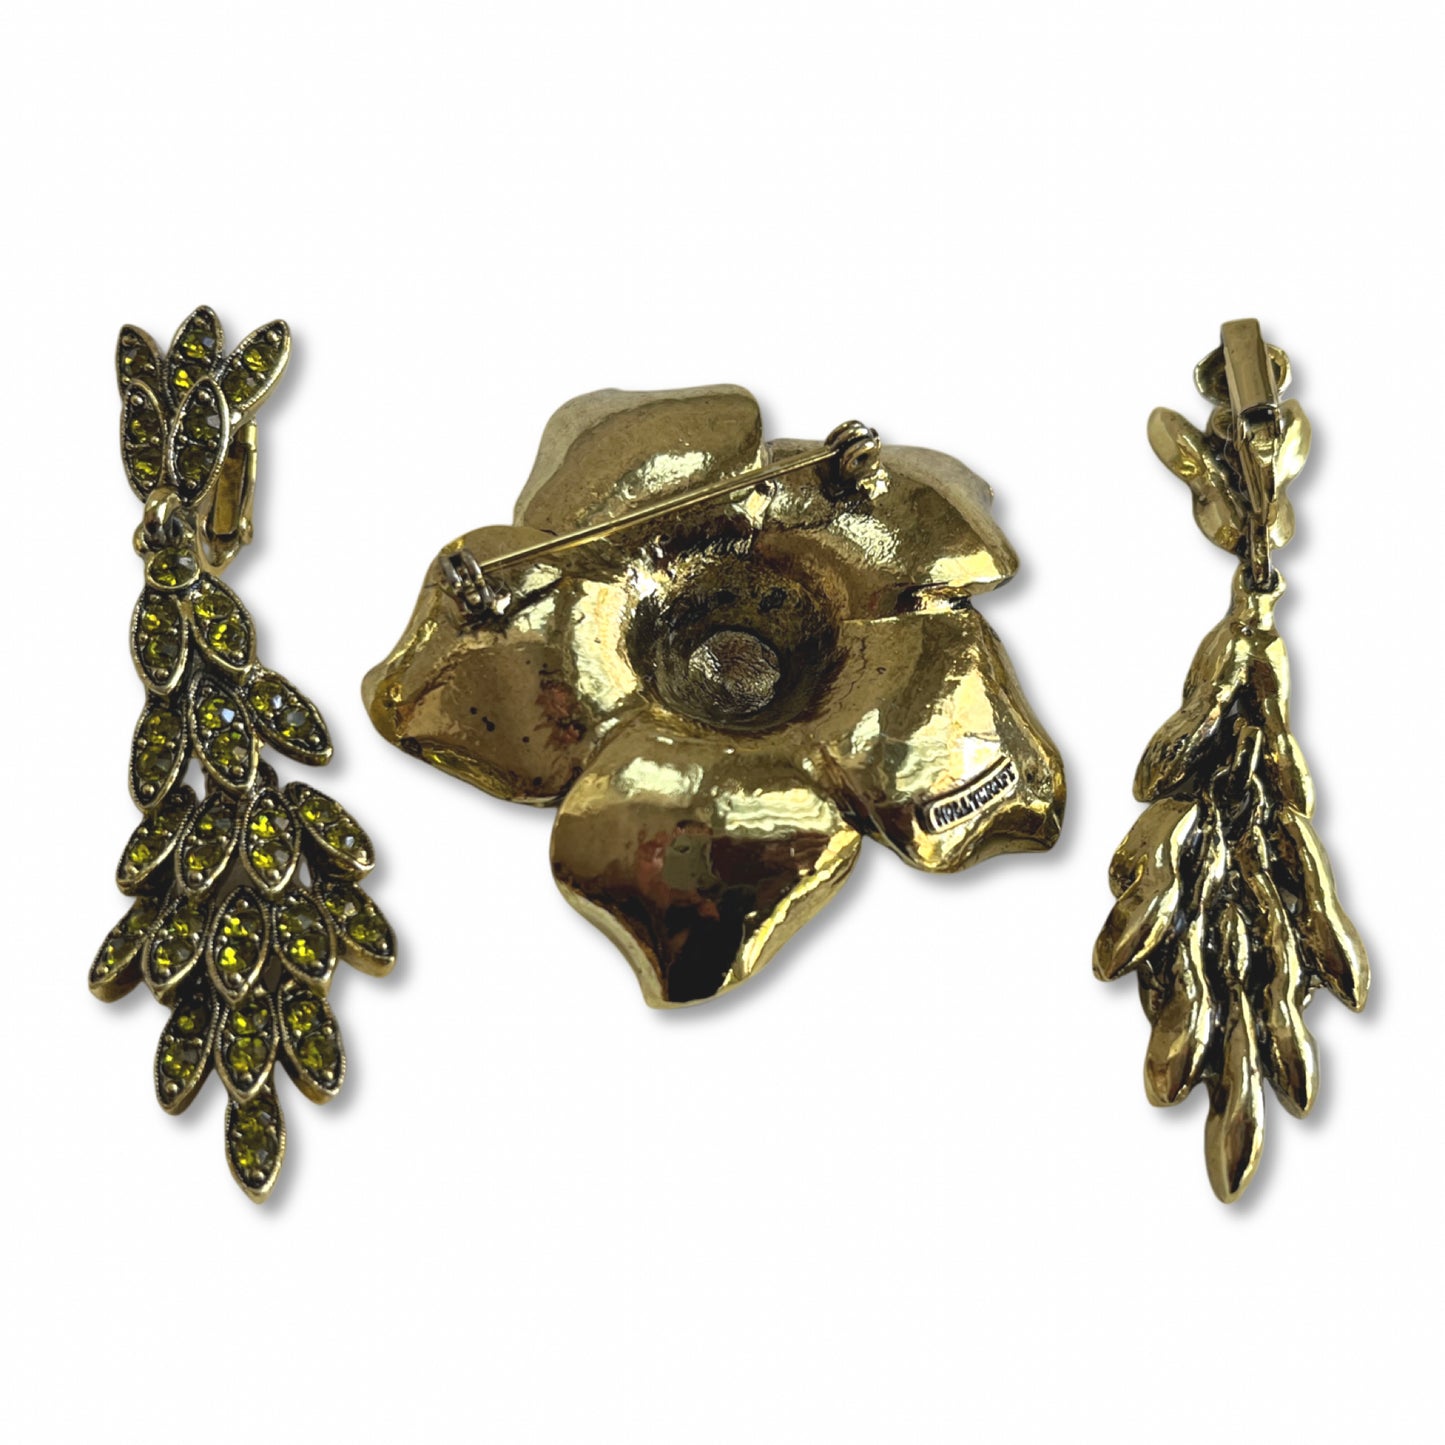 VJ-9042 HollyCraft Olive colored flower brooch and earrings